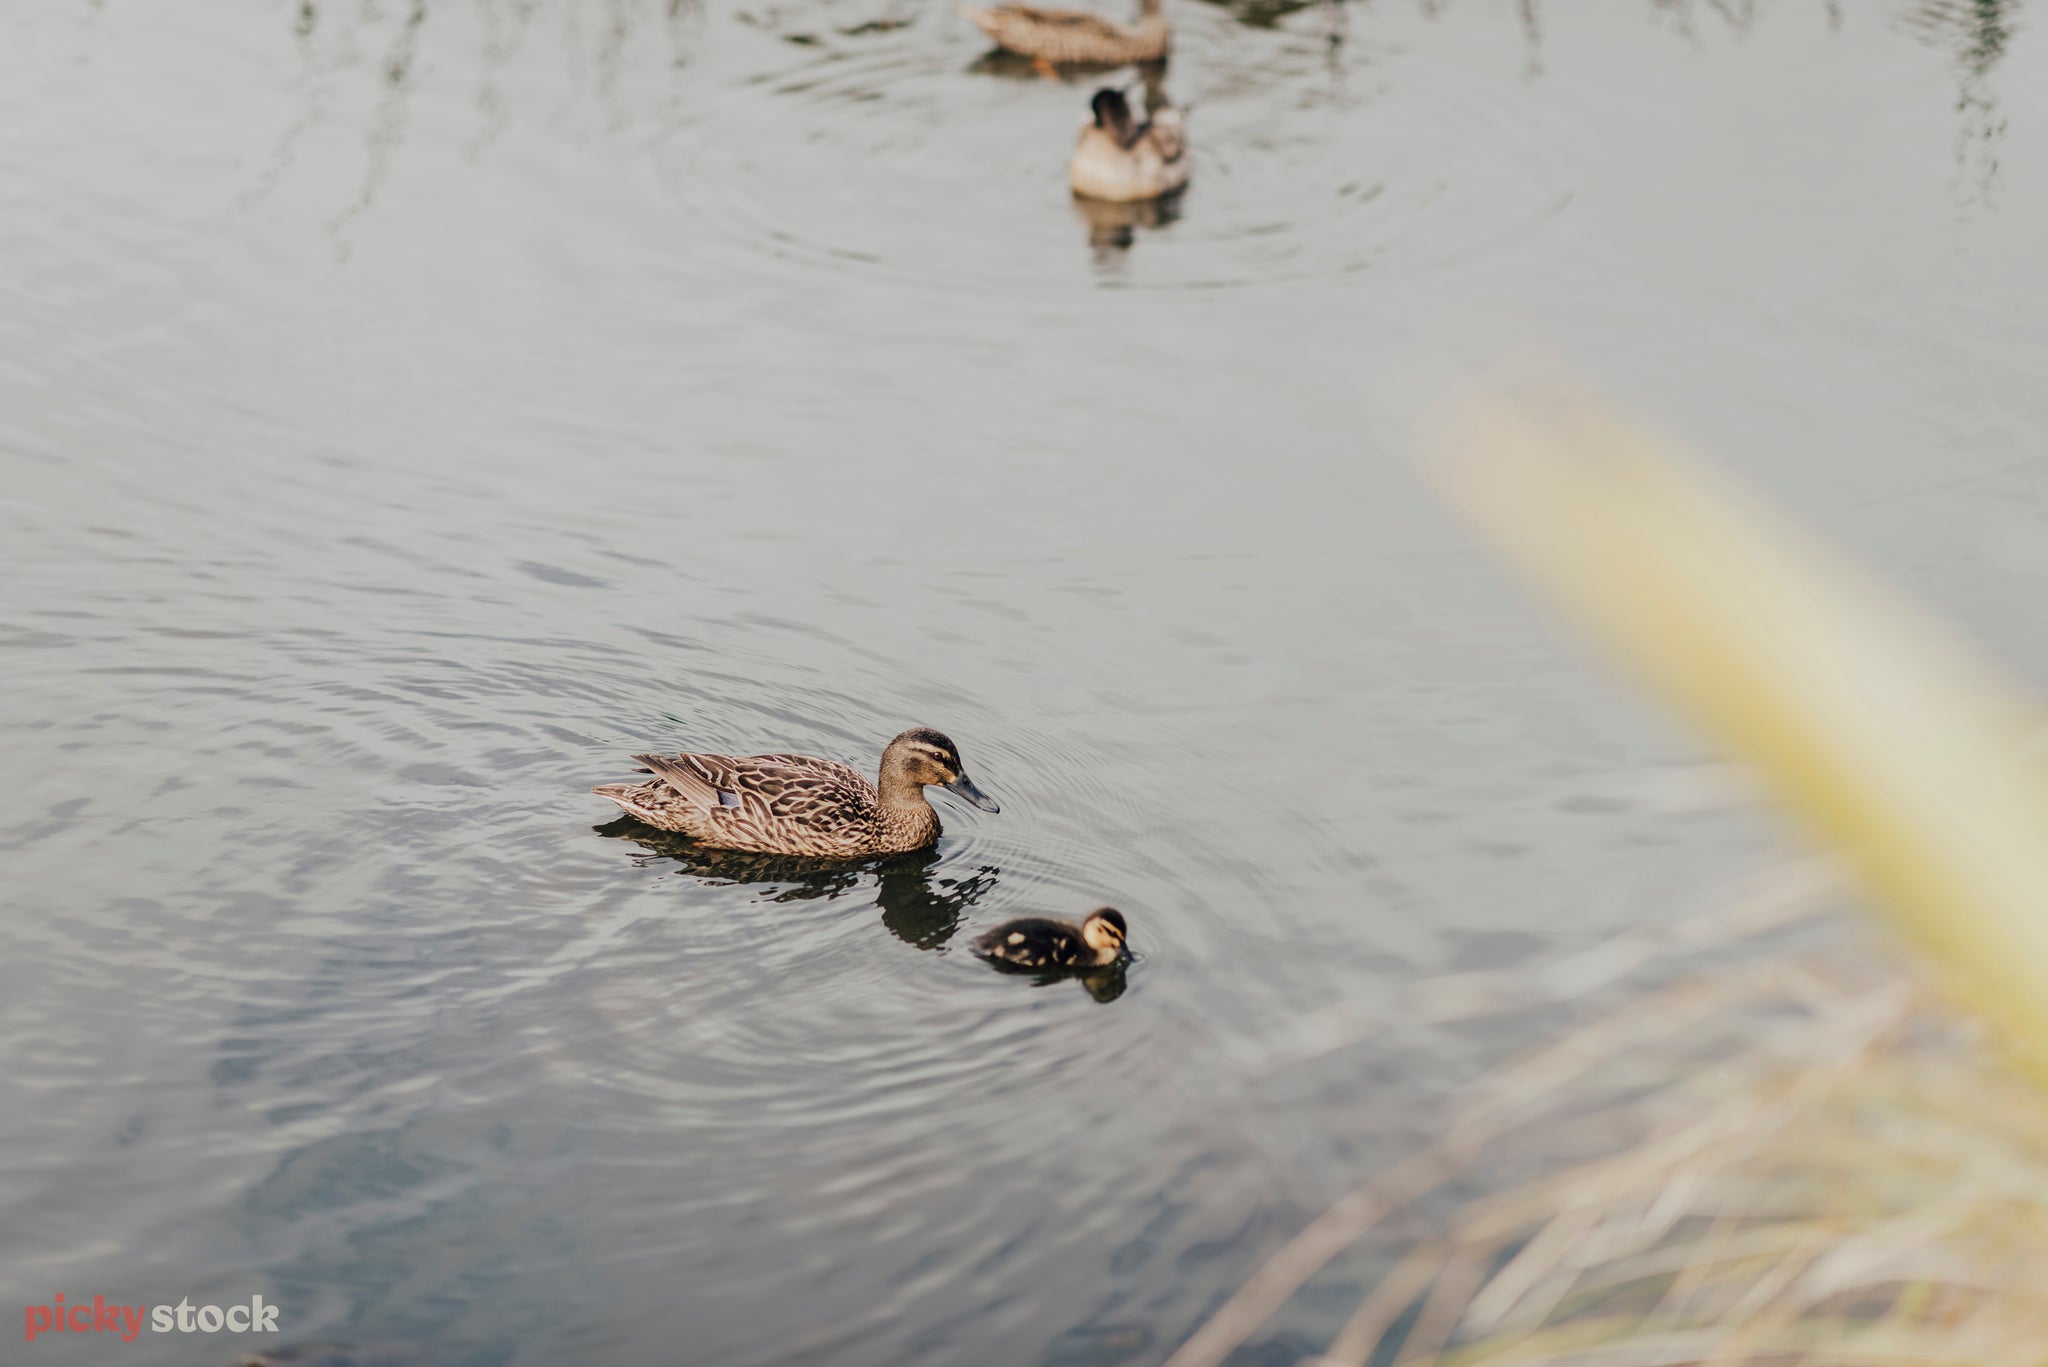 A mother duck and duckling paddle forwards in a pond.